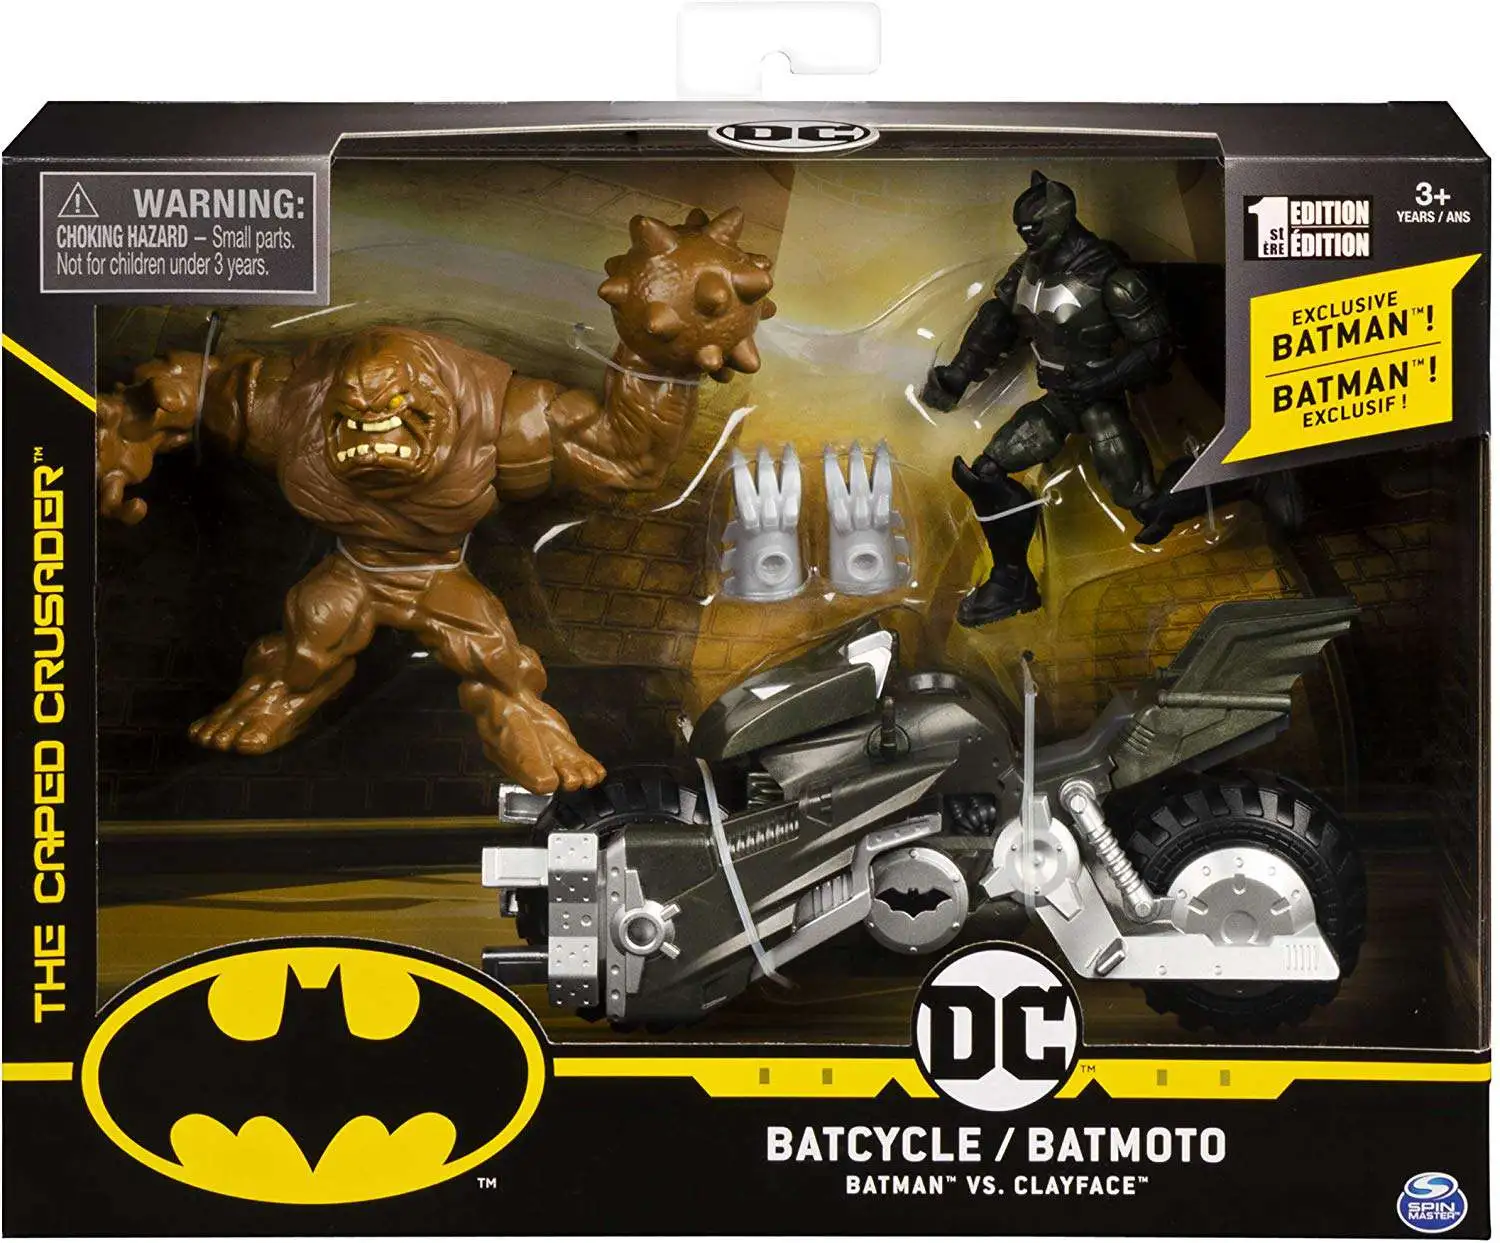 DC Batcycle Batman VS Clayface The Caped Crusader 1st Edition Spinmaster for sale online 